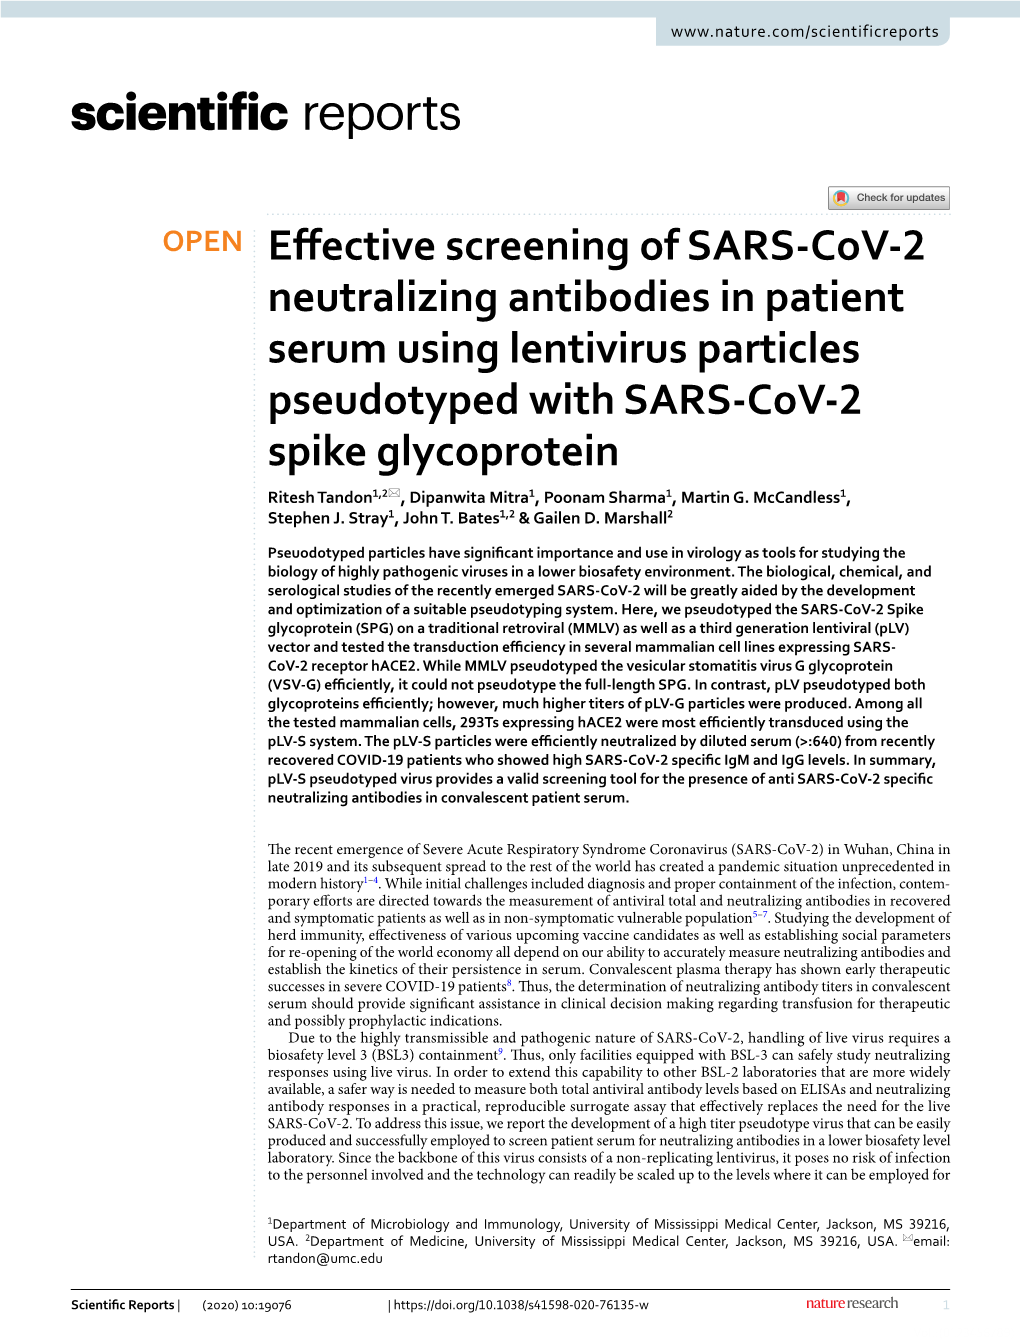 Effective Screening of SARS-Cov-2 Neutralizing Antibodies in Patient Serum Using Lentivirus Particles Pseudotyped with SARS-Cov